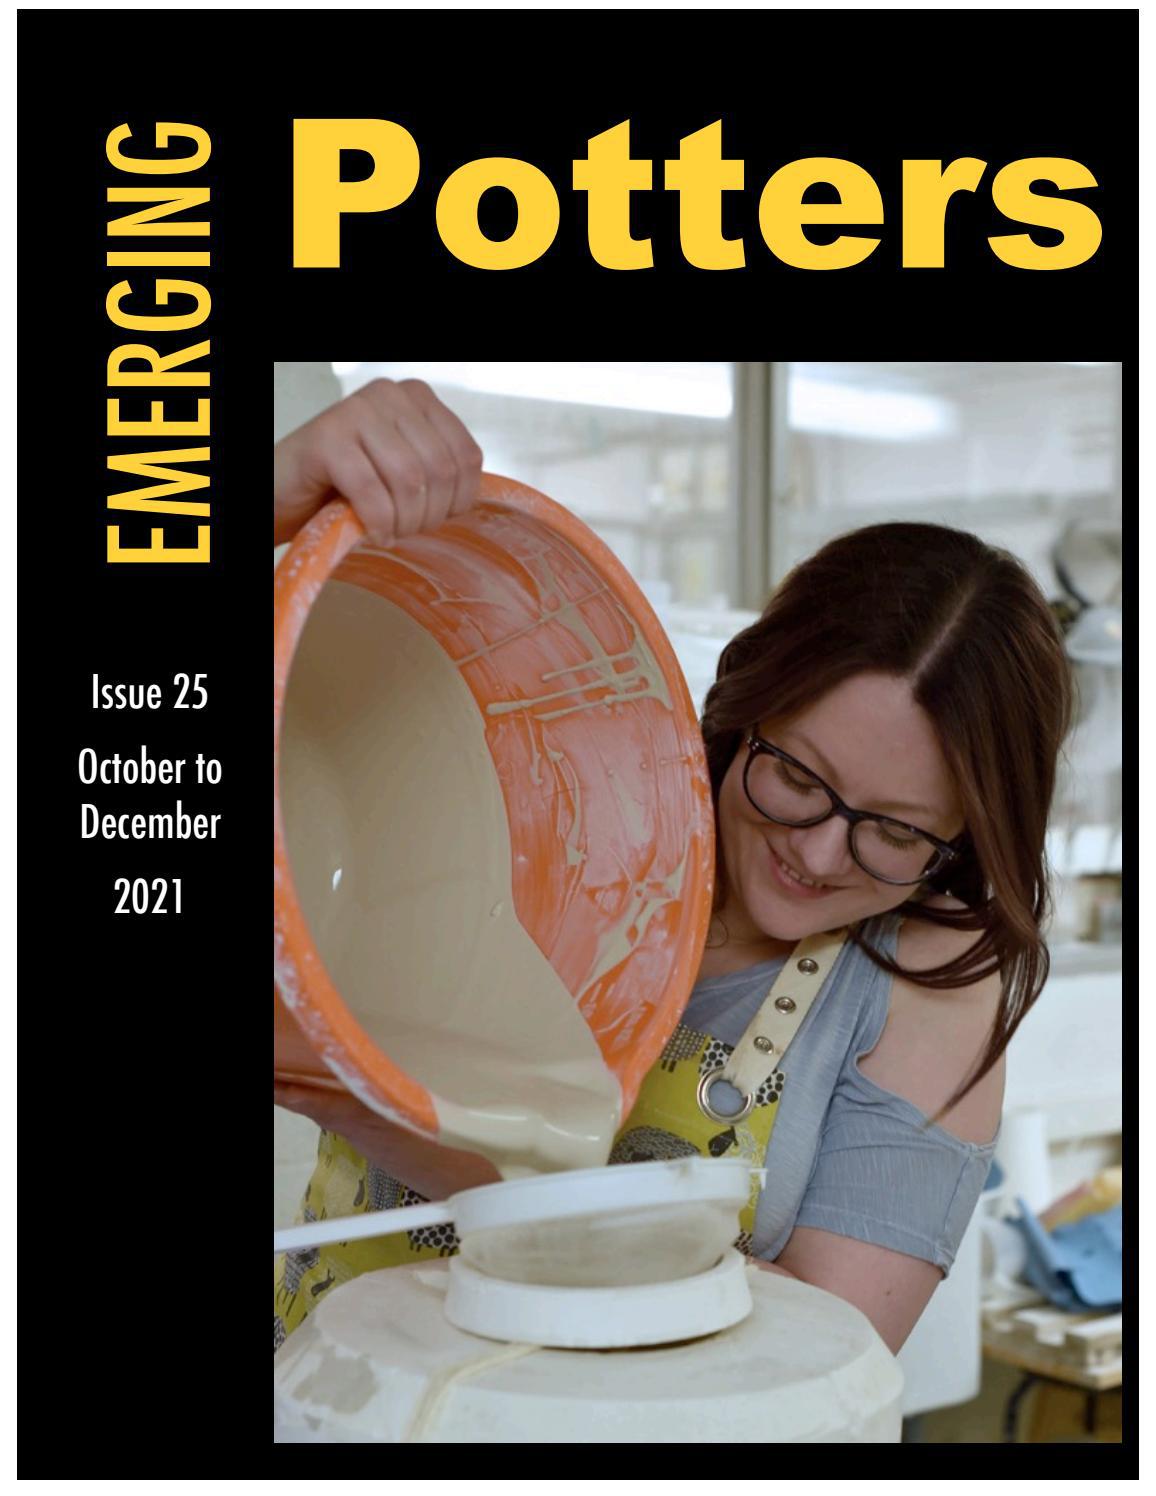 Emerging Potters magazine - October to December 2021